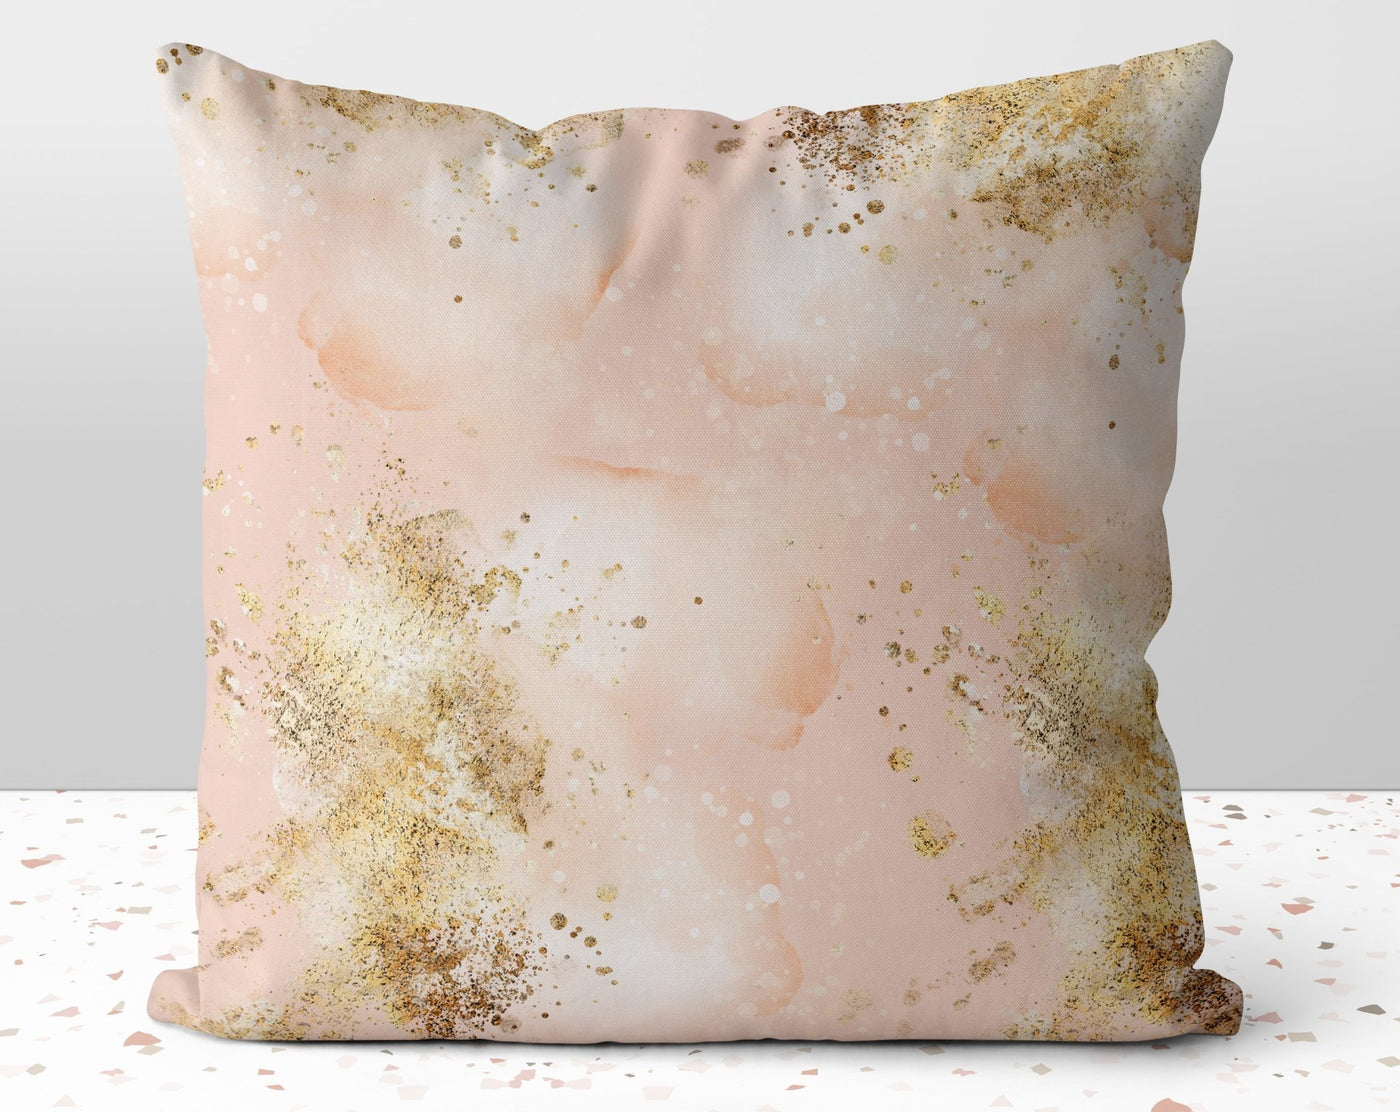 Abstract Pink + Gold Printed Accents Pillow Throw Cover with Insert - Cush Potato Pillows